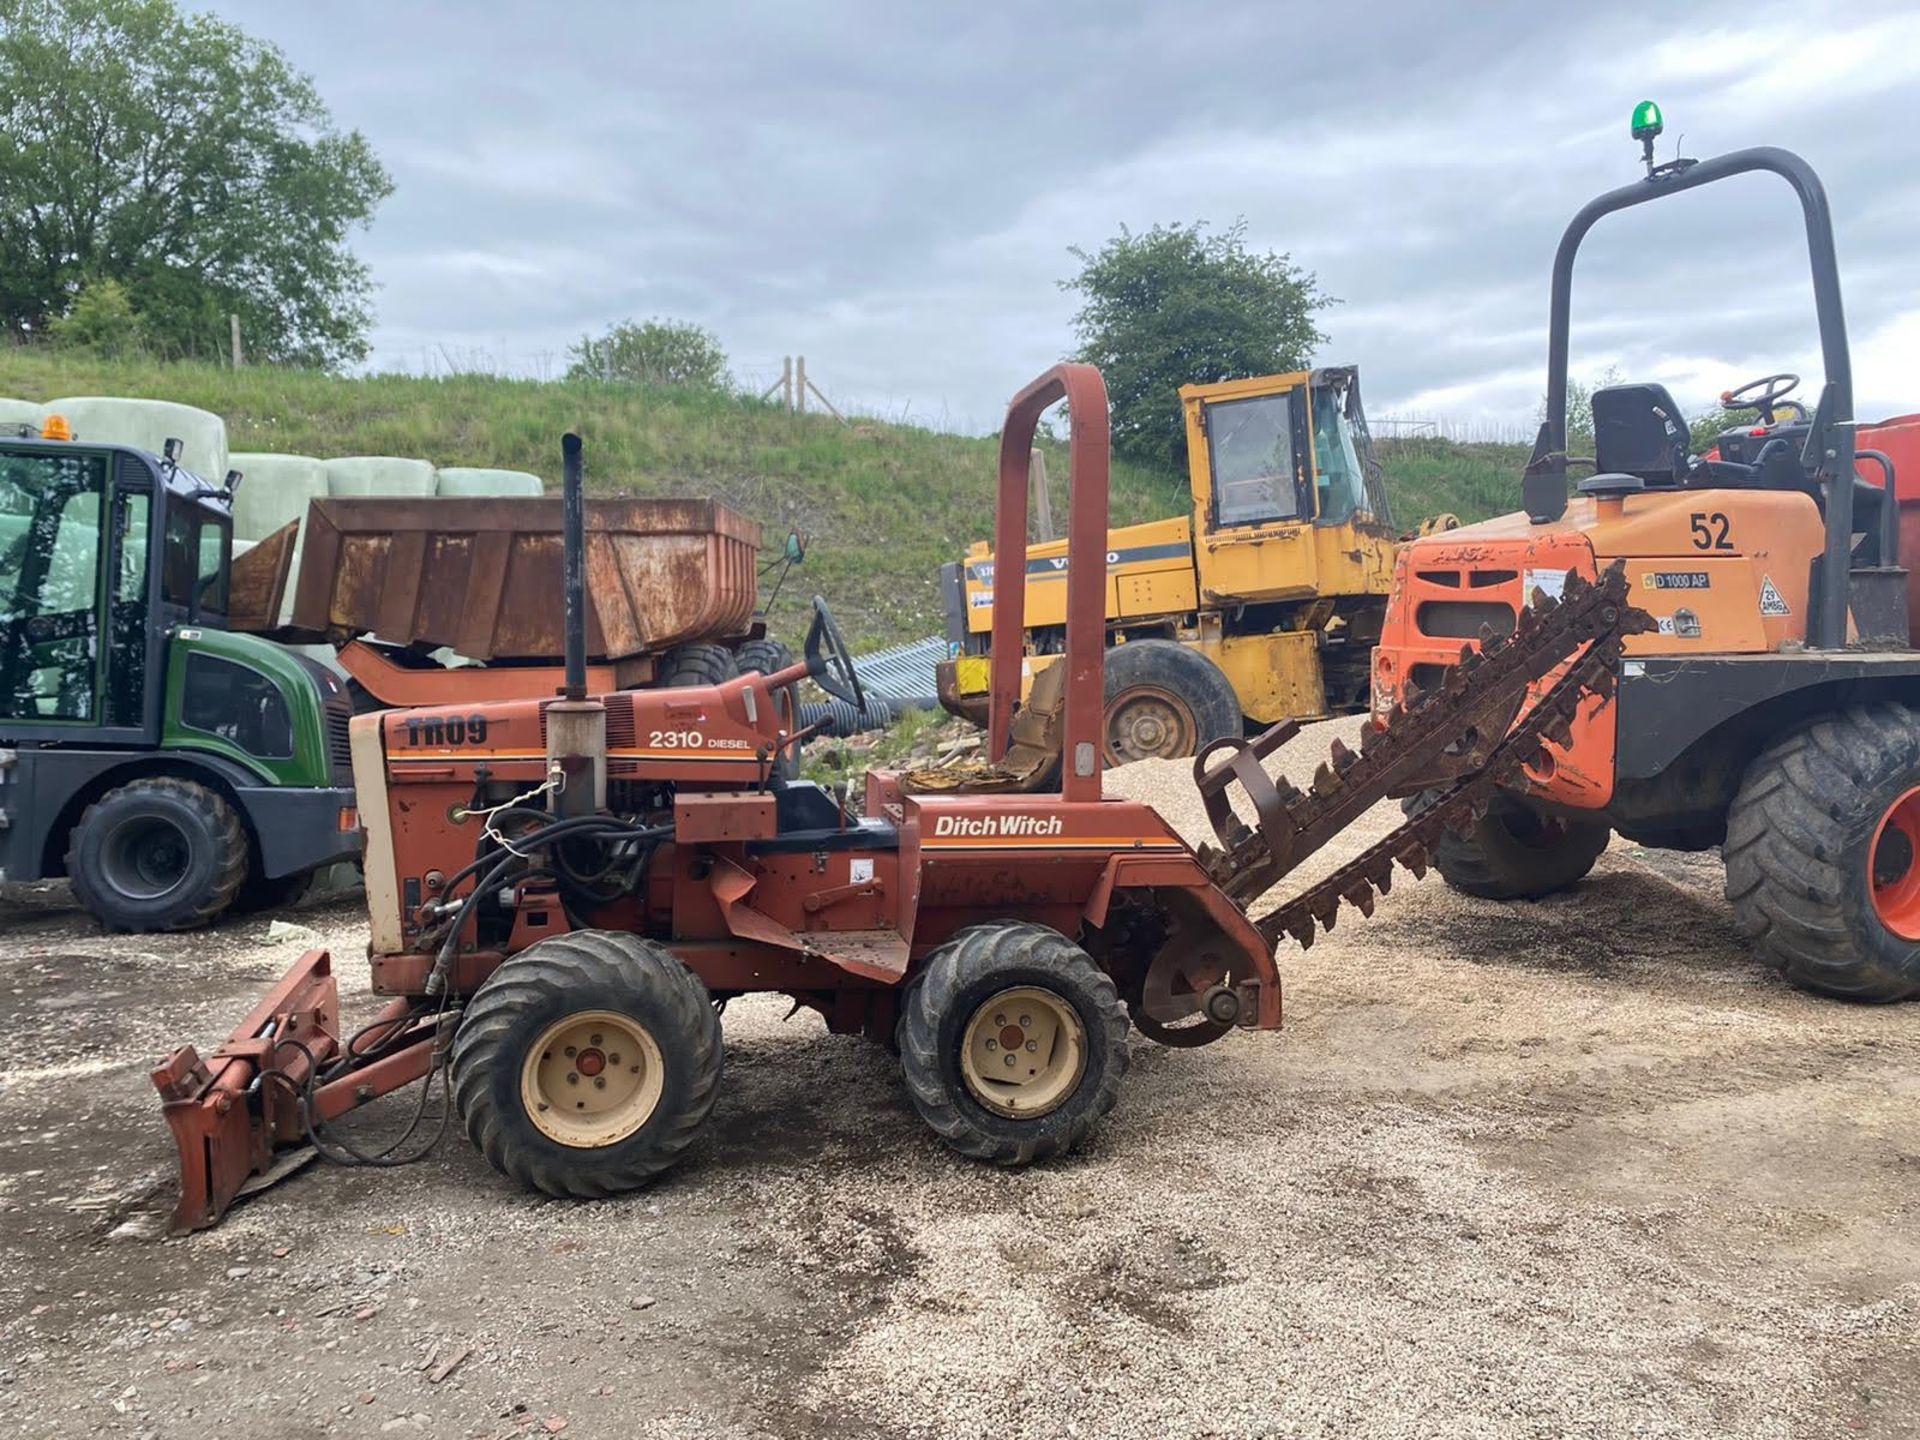 DITCH WITCH 2310 TRENCHER, RUNS AND WORKS, SHOWING 768 HOURS *PLUS VAT* - Bild 2 aus 7